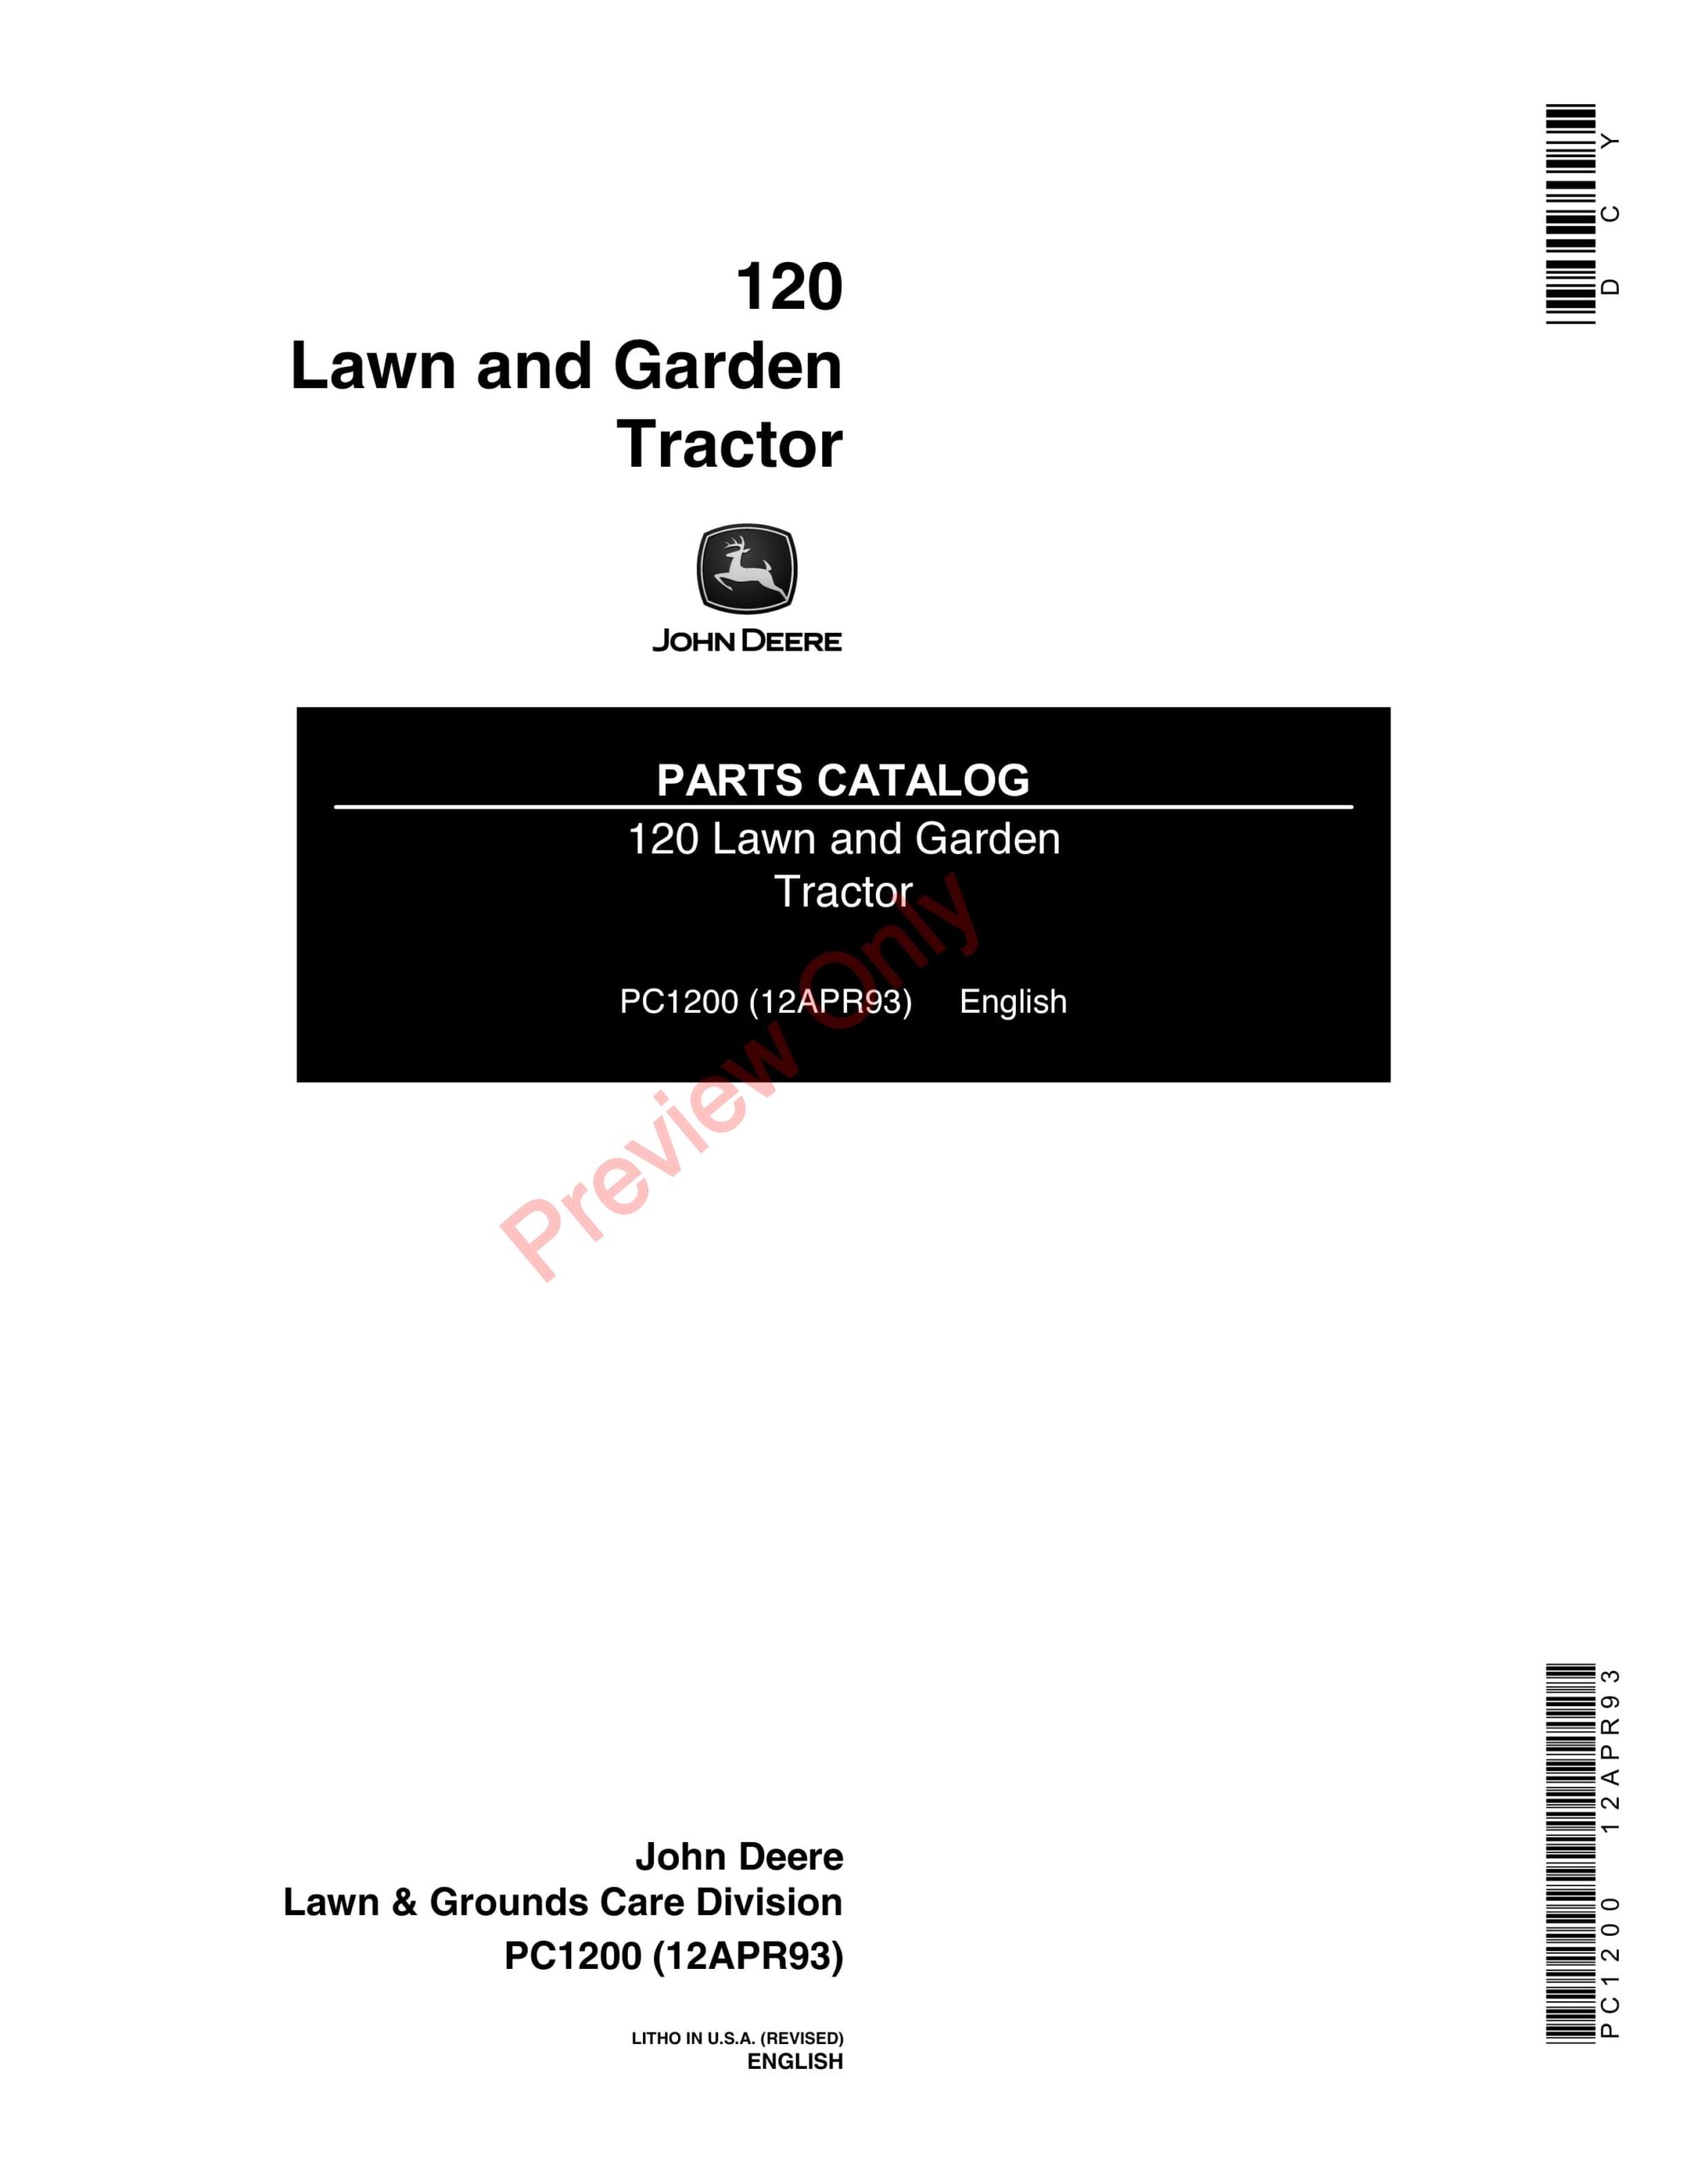 John Deere 120 Lawn and Garden Tractor Parts Catalog PC1200 12APR93-1